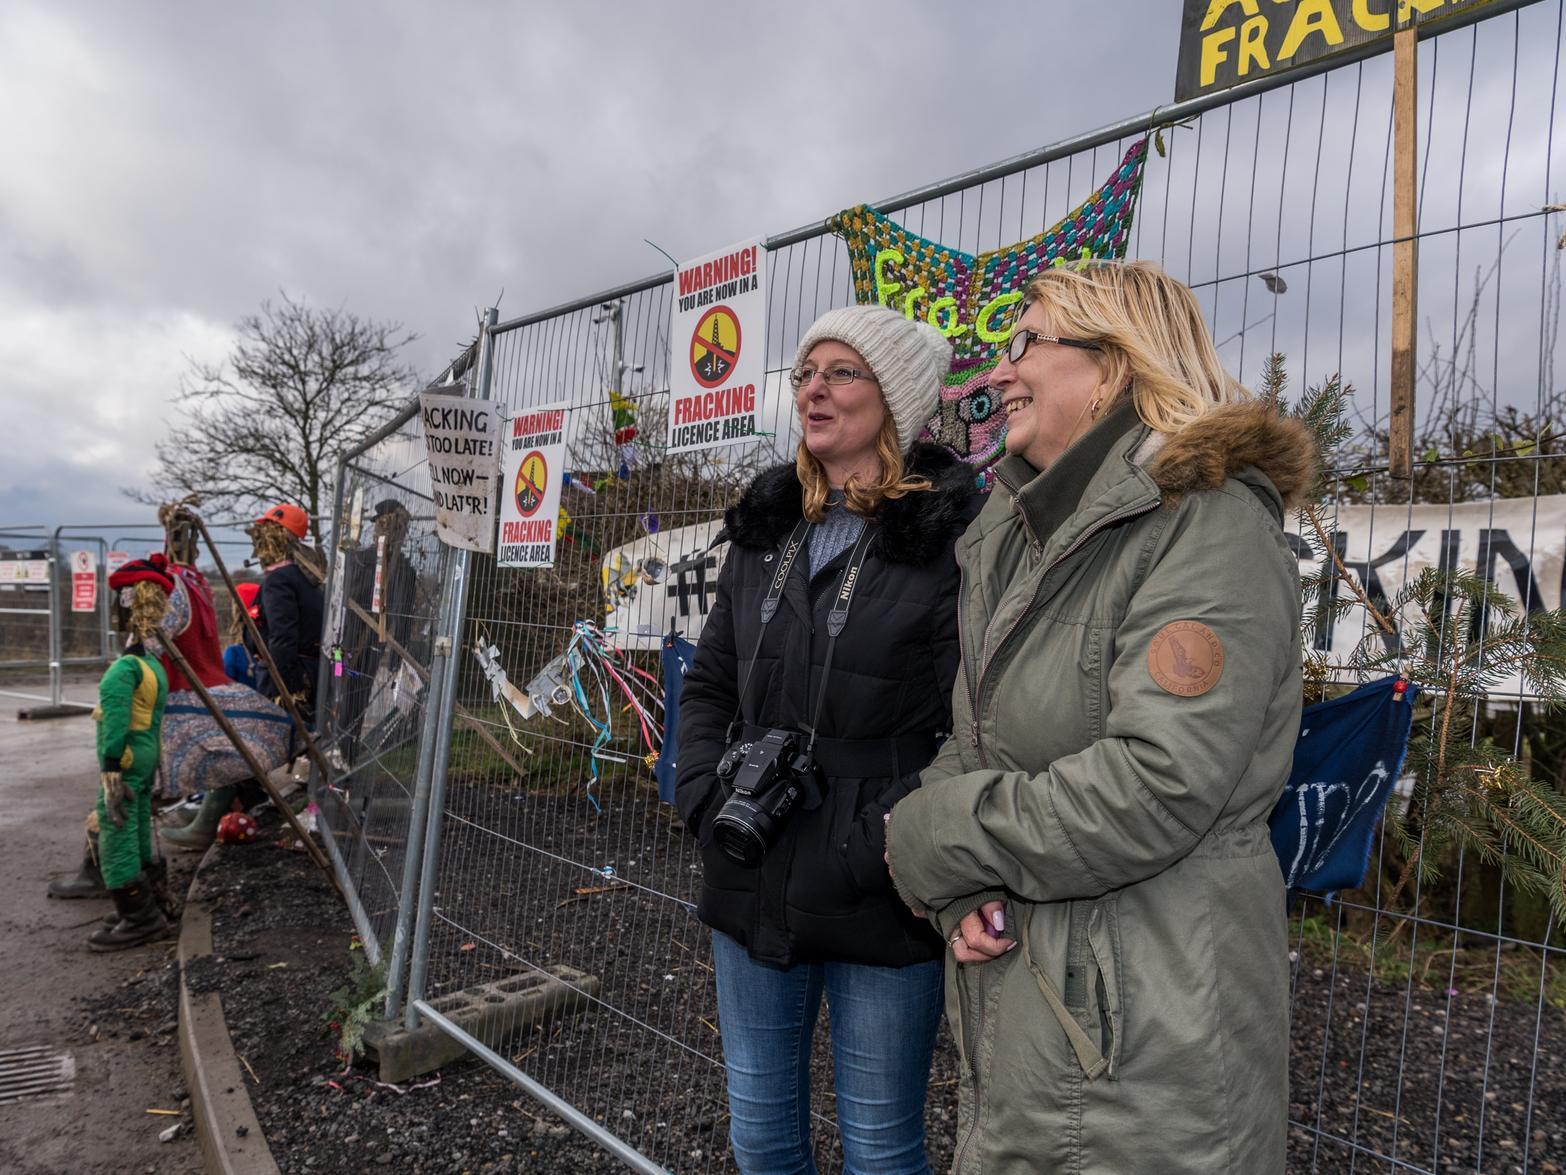 Local residents and anti-fracking protesters Julie Winship and Suzanne Rayment, of Kirby Misperton.